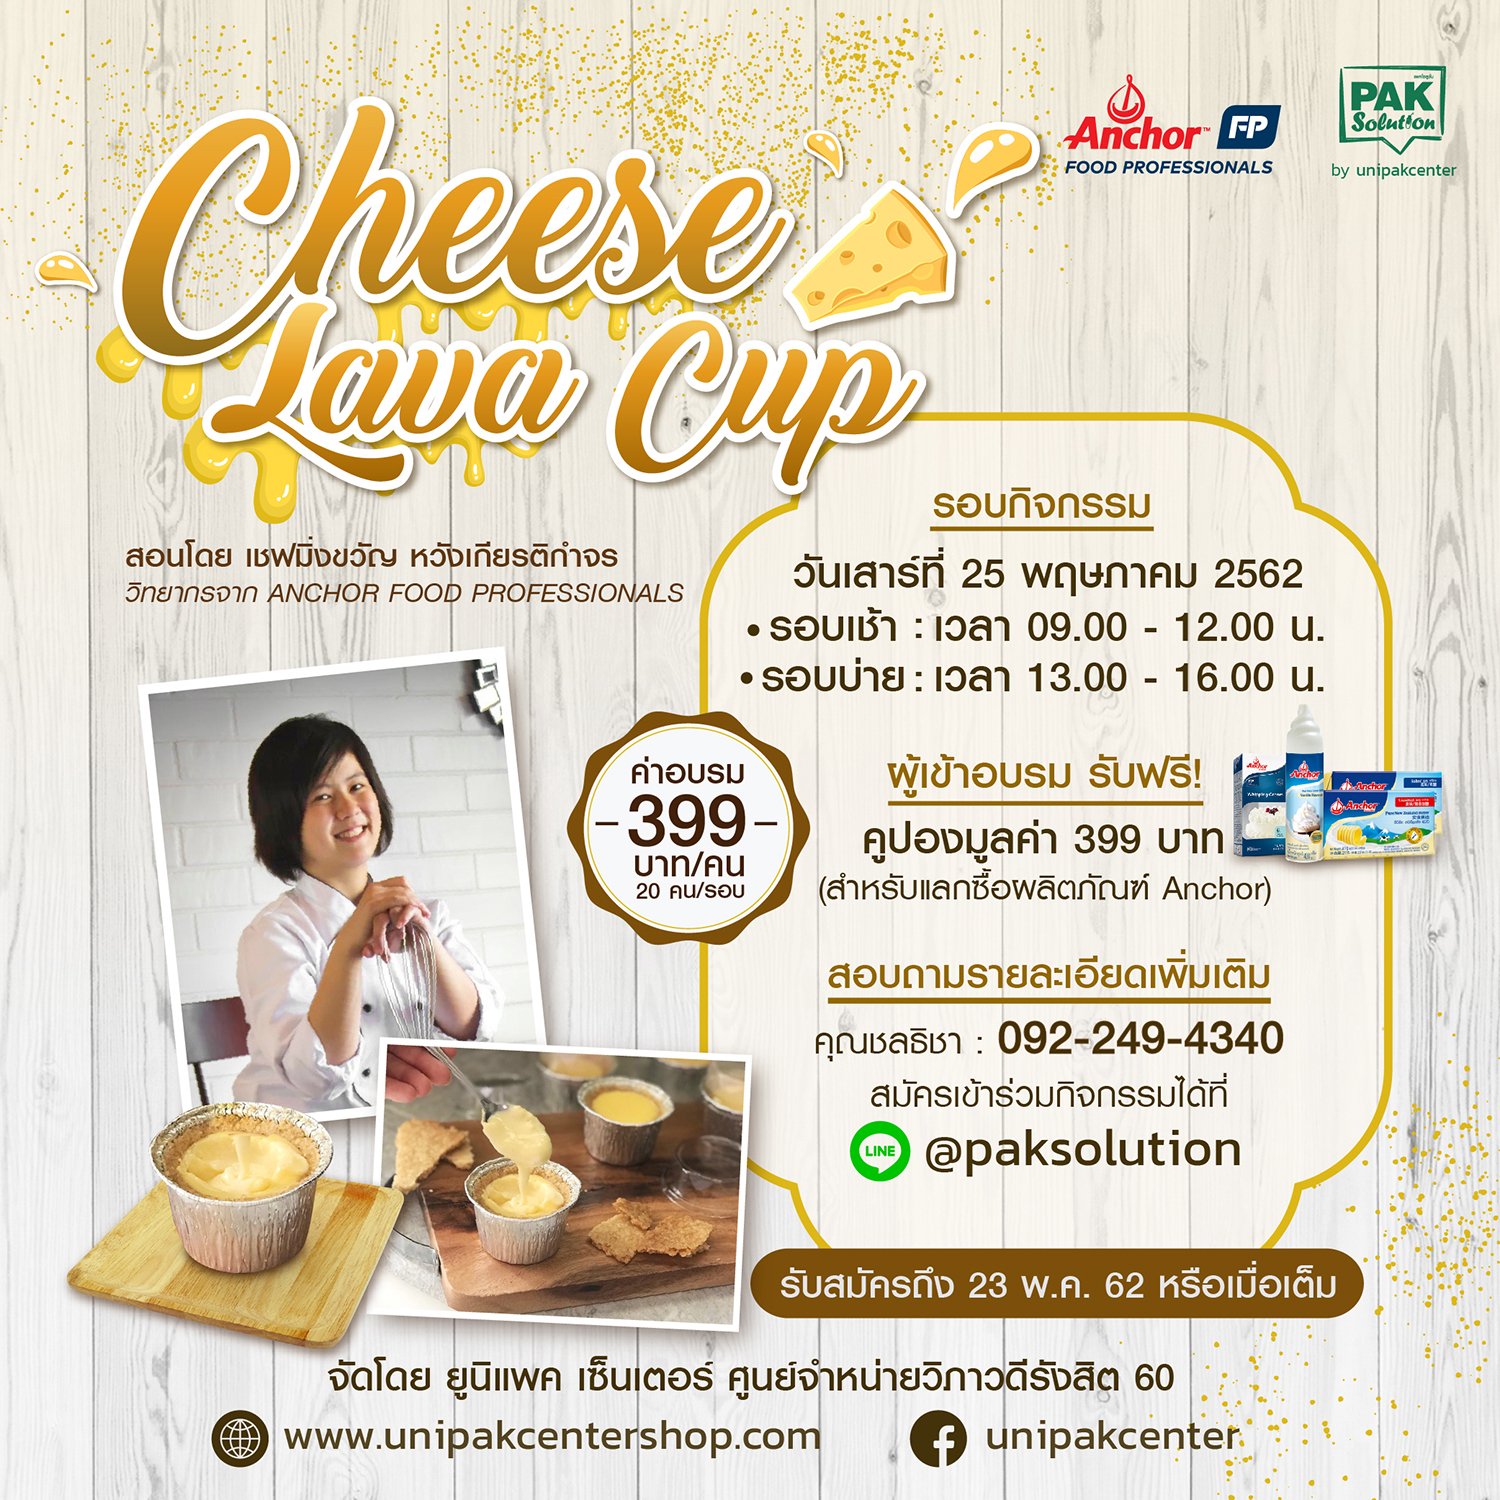 WORKSHOP  CHEESE LAVA CUP 